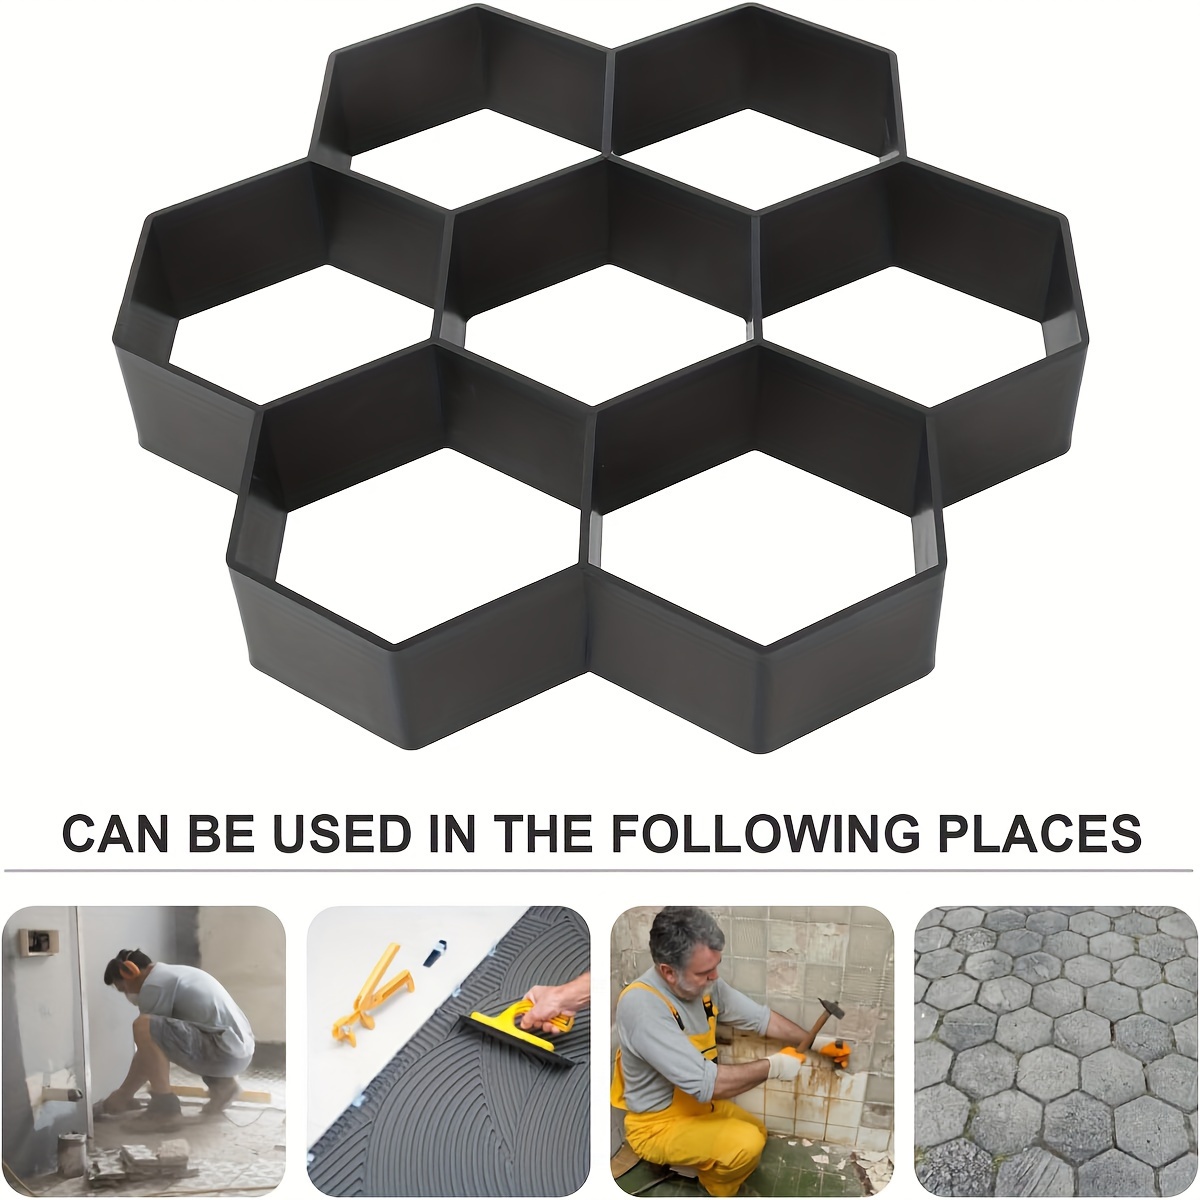 

Hexagon Pavement Mold, 11.4"x11.4"x1.5" Reusable Walkway Maker, Diy Garden Concrete Path Maker For Patio Lawn Step Stone, Courtyard Ground Paving Cement Mould, Plastic Material